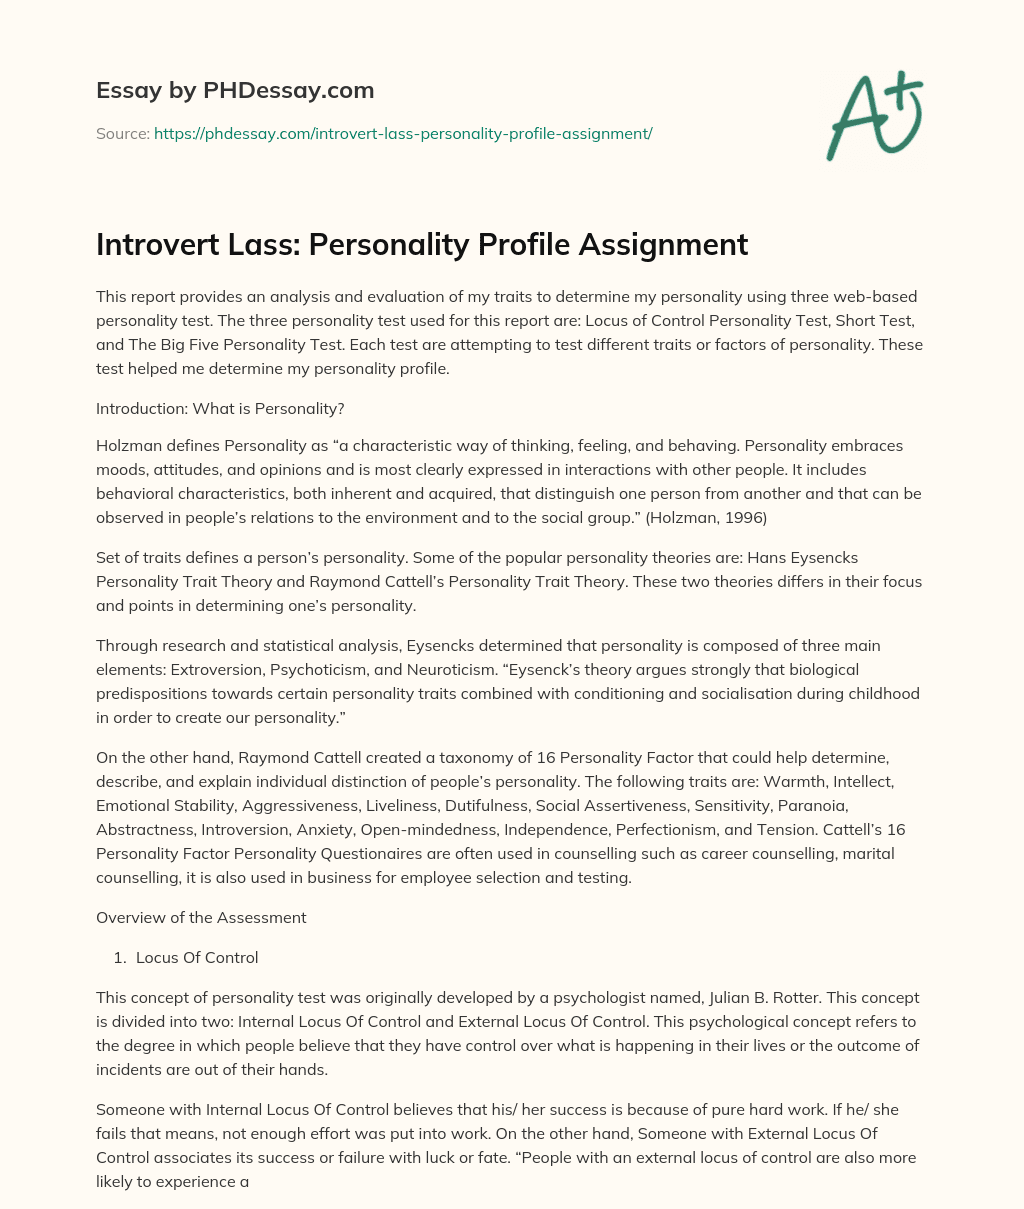 Introvert Lass: Personality Profile Assignment essay